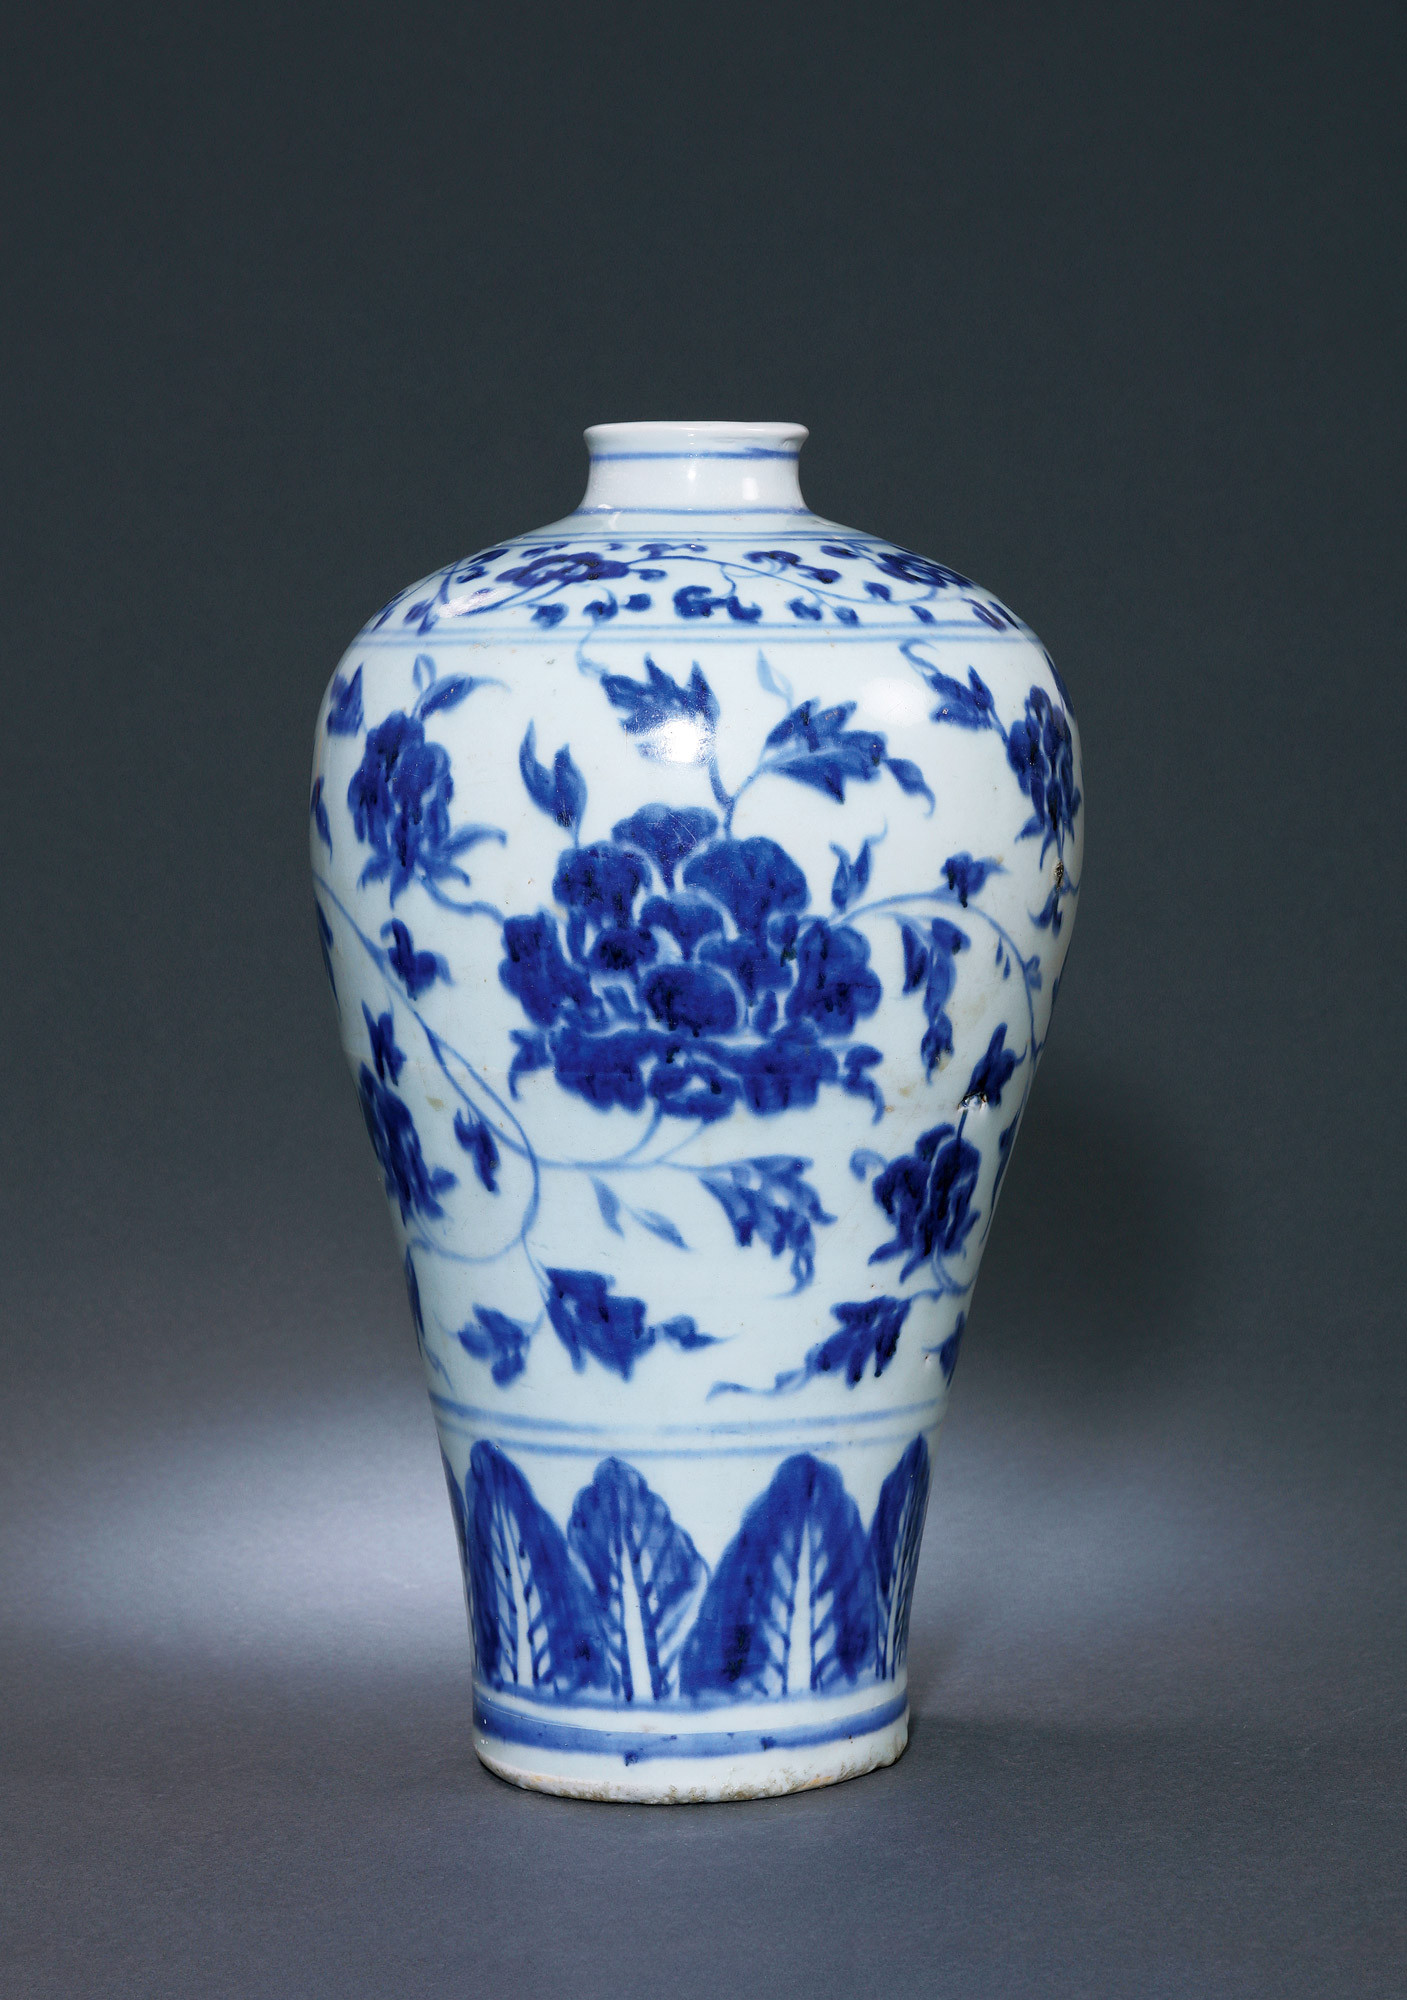 A BLUE AND WHITE PLUM VASE WITH FLOWER DESIGN